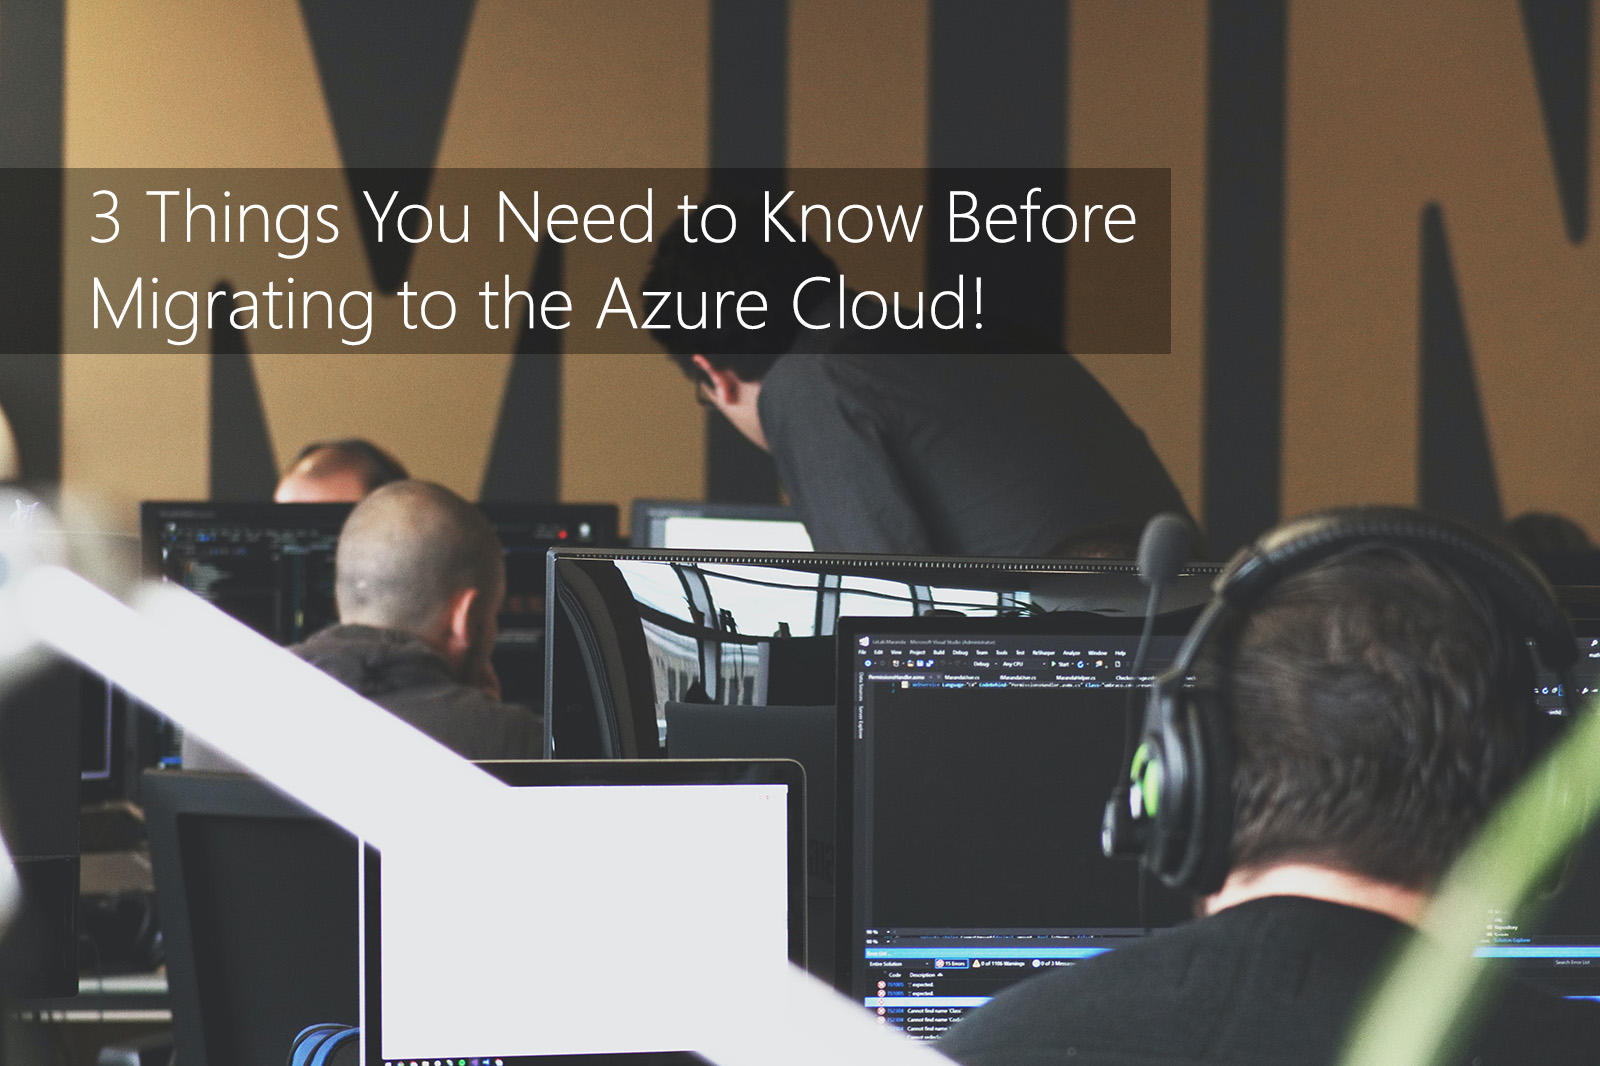 TMC-blog-3-things-you-need-to-know-before-migrating-to-azure-cloud